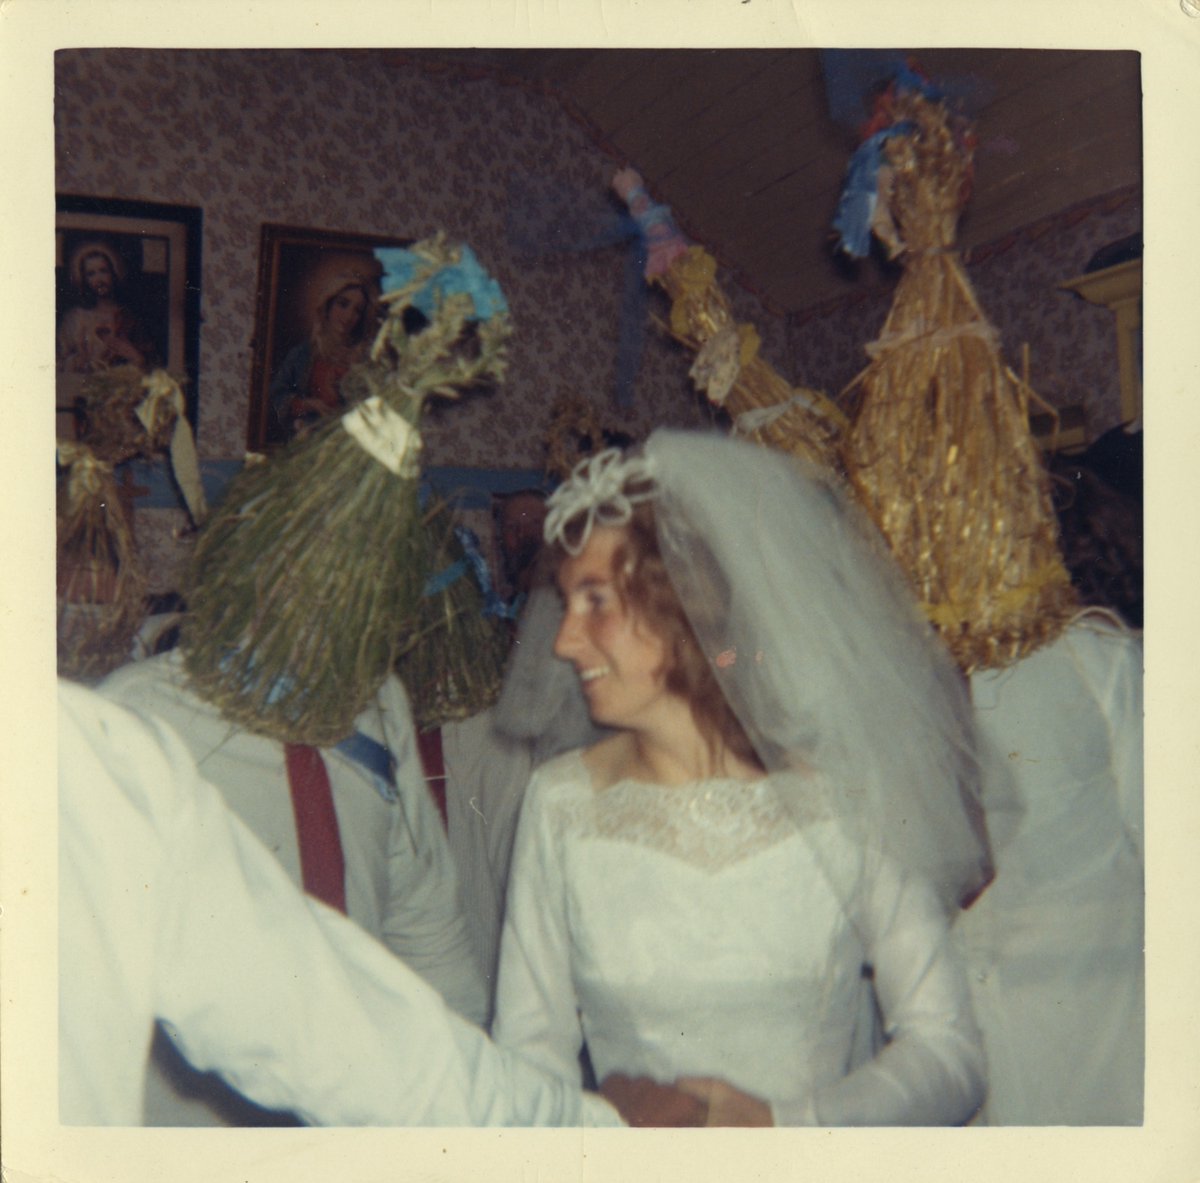 Marriage divination at Shrove was topical, as Shrove Tuesday was also a popular day for weddings. The strict Lenten period was an inappropriate time for marriage, and so Shrovetide weddings were celebrated into the night with dancing, music and feasting.